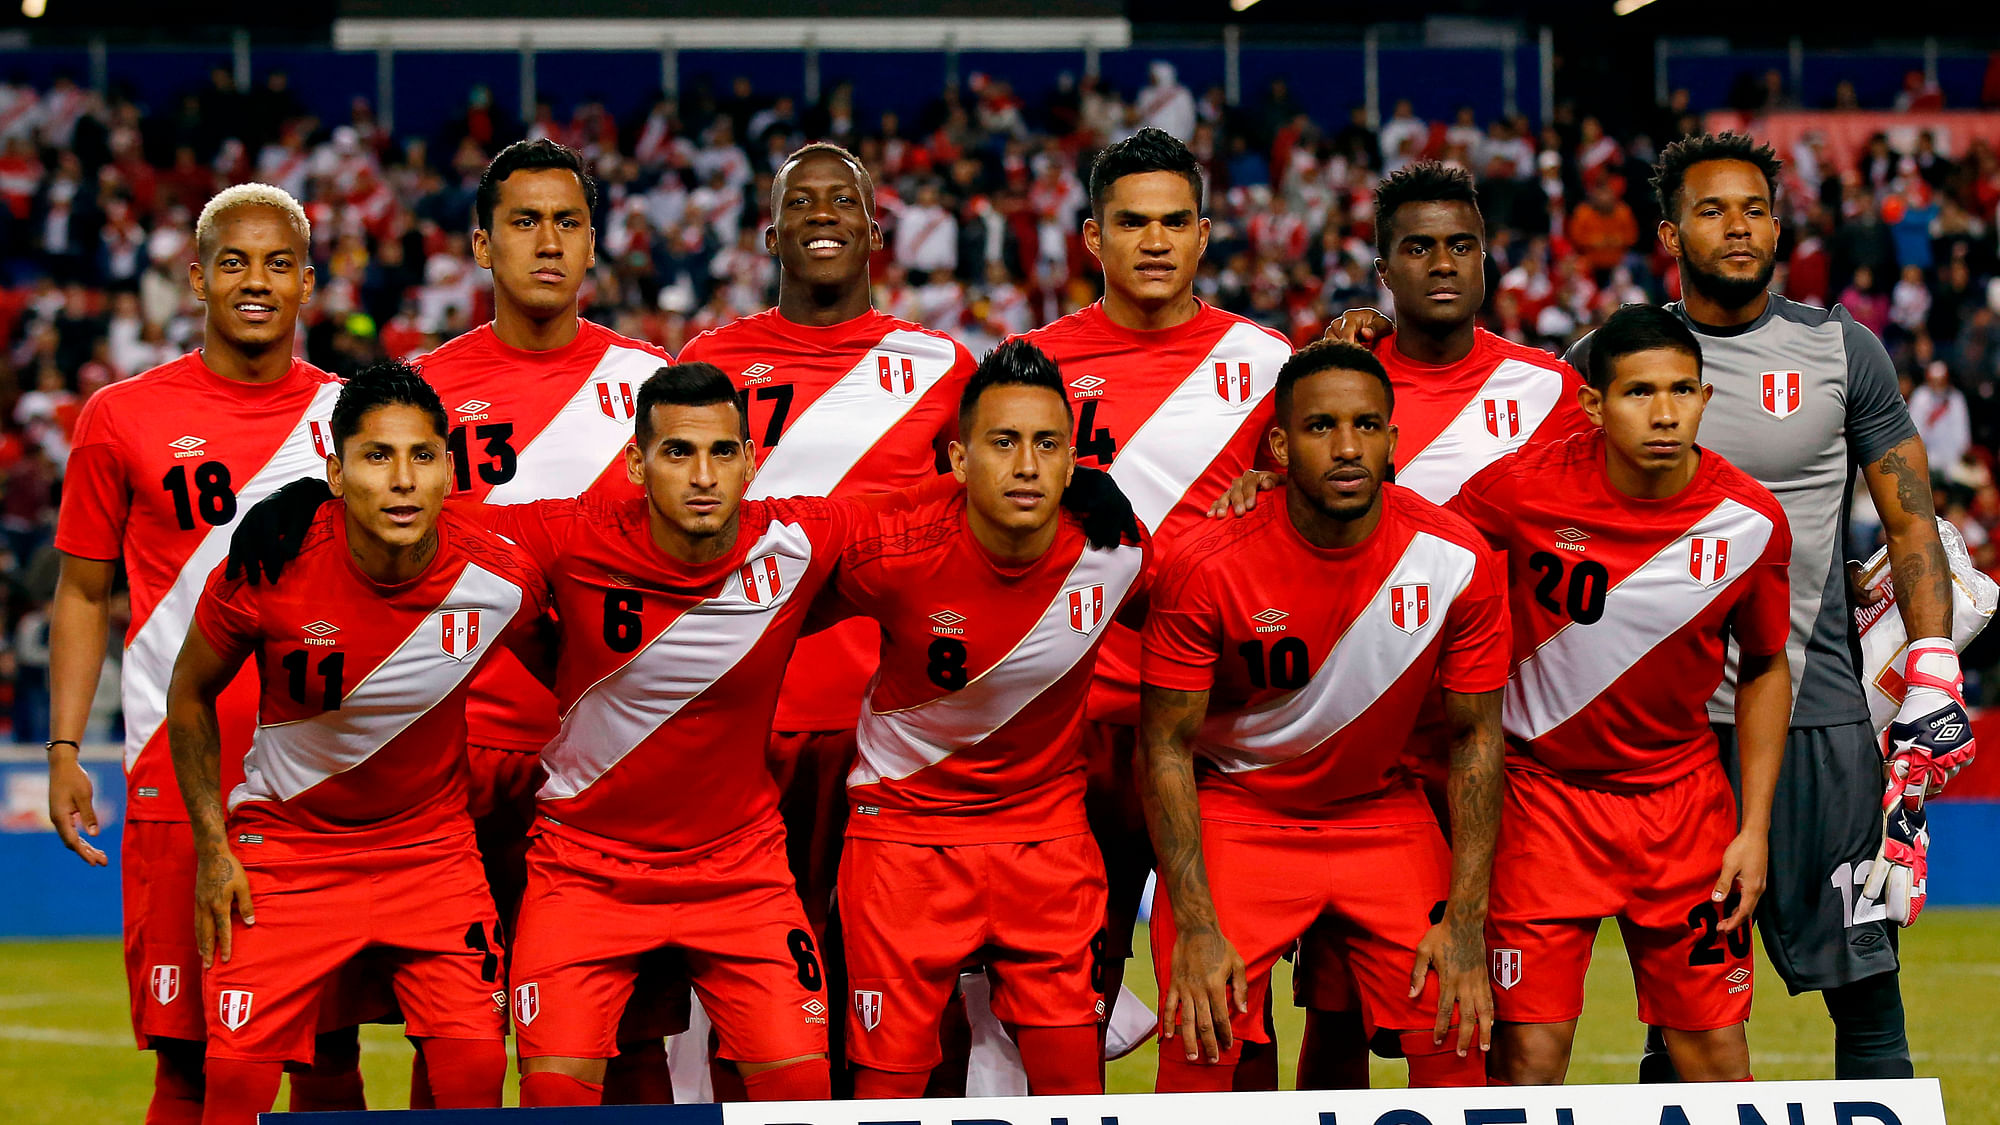 FIFA World Cup Preview Peru Returns to Finals After 36 Years